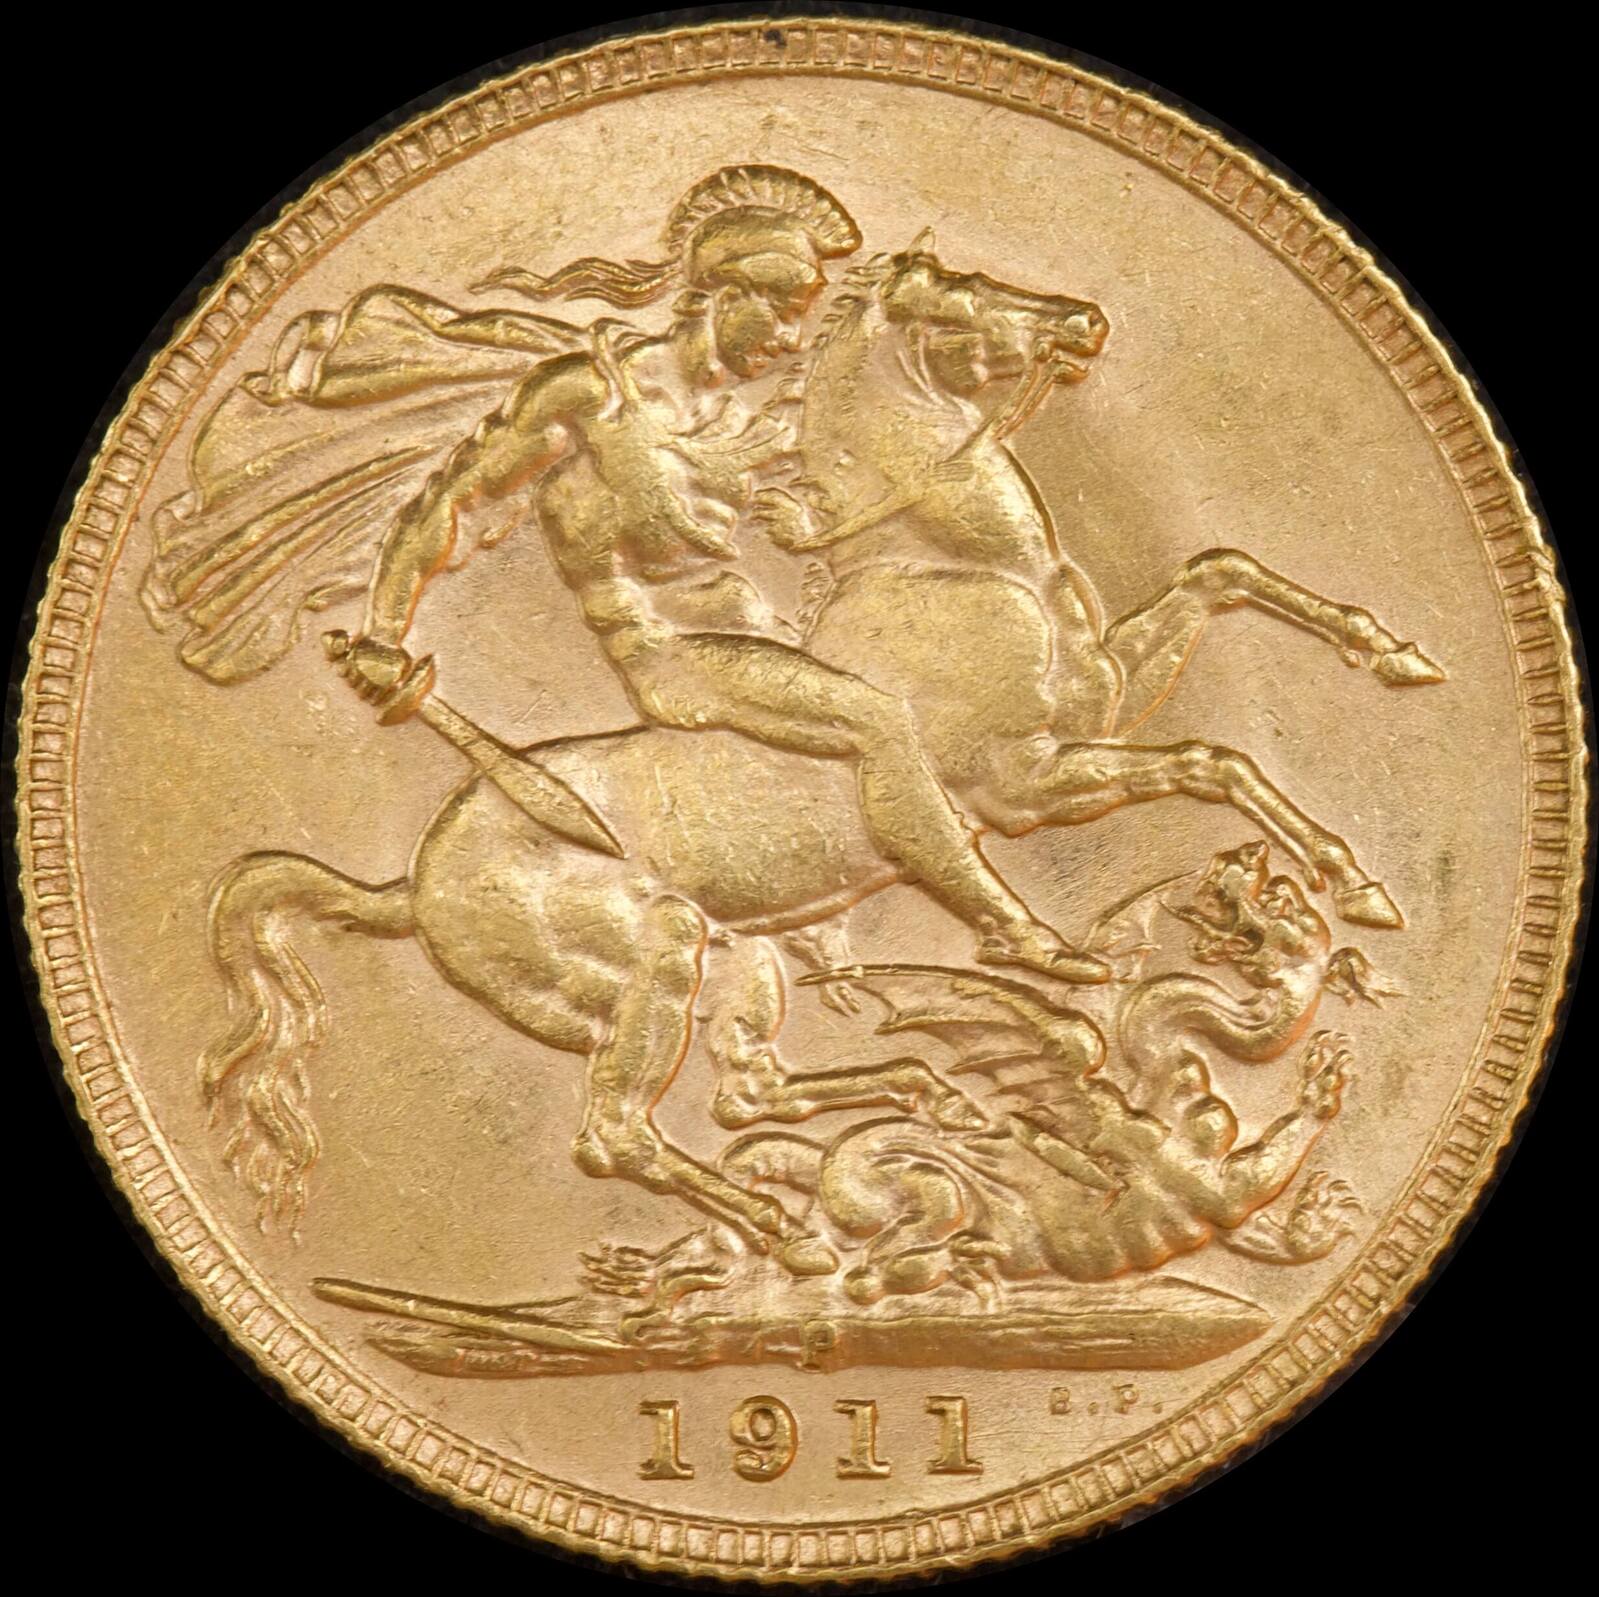 1911 Perth George V Large Head Sovereign about Unc product image